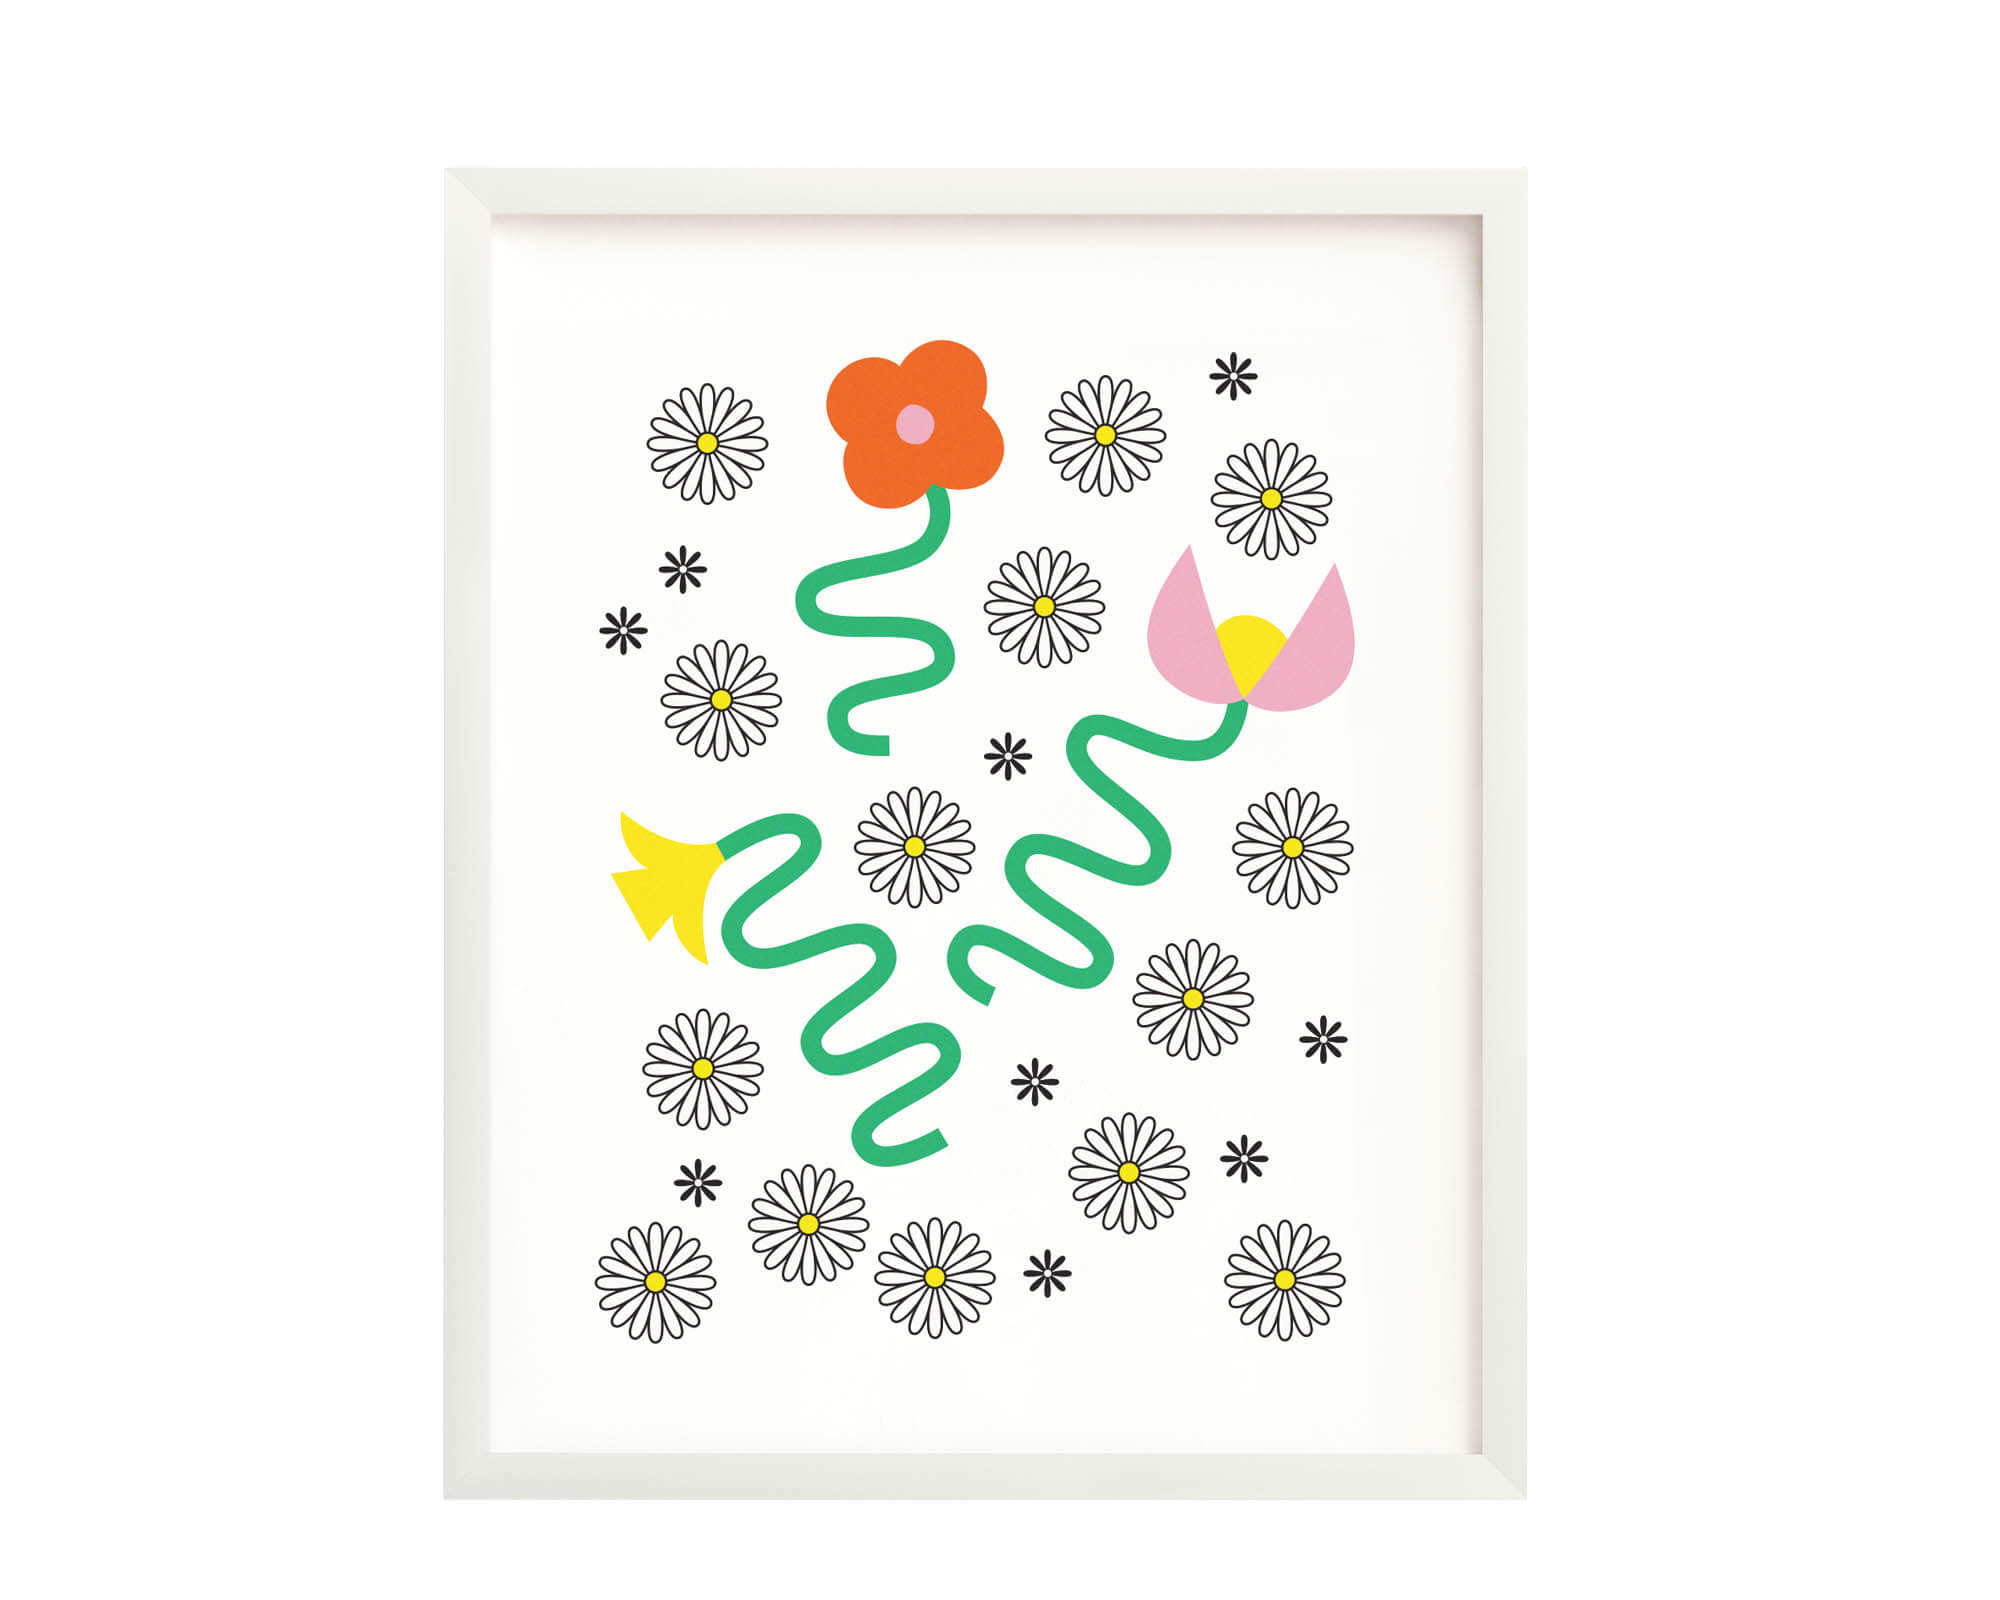 "Dances with Fleurs" squiggly fleurs archival giclée floral art print. Made in USA by My Darlin' @mydarlin_bk